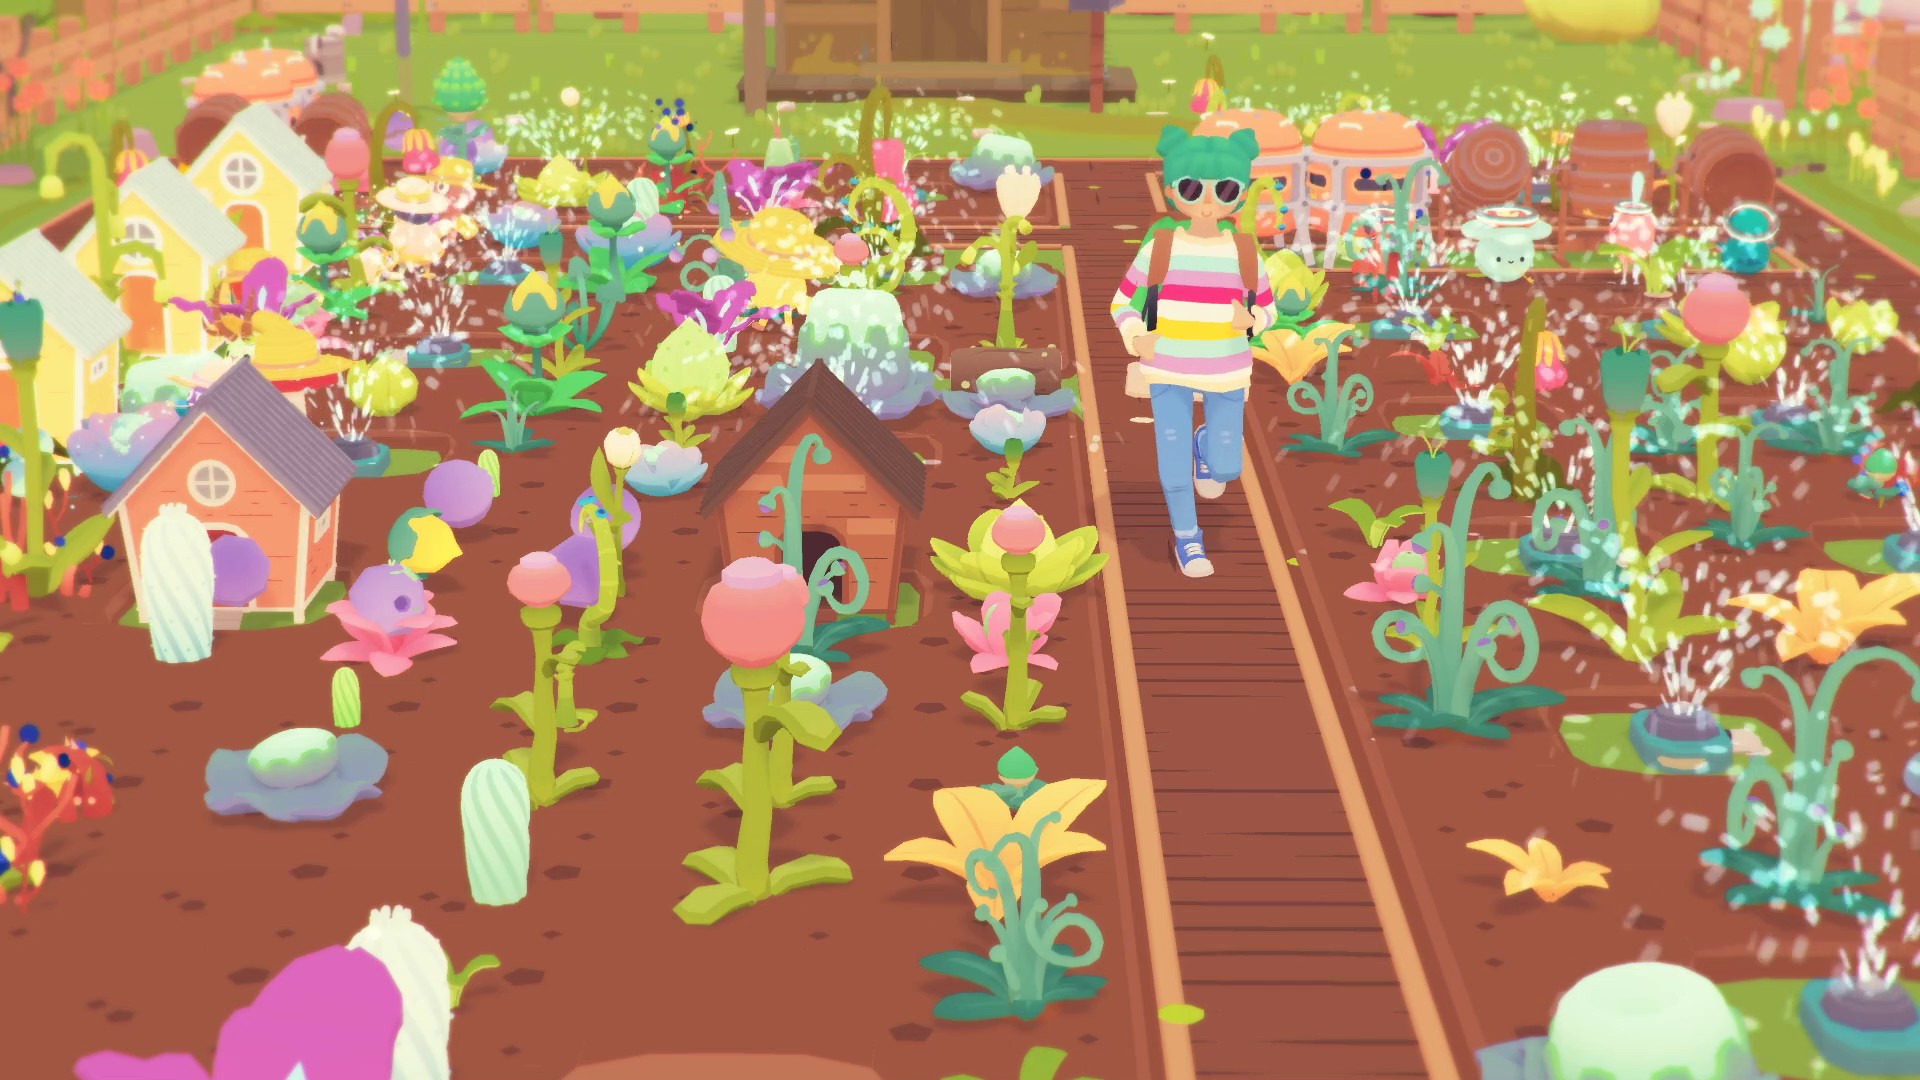 download free ooblets on switch